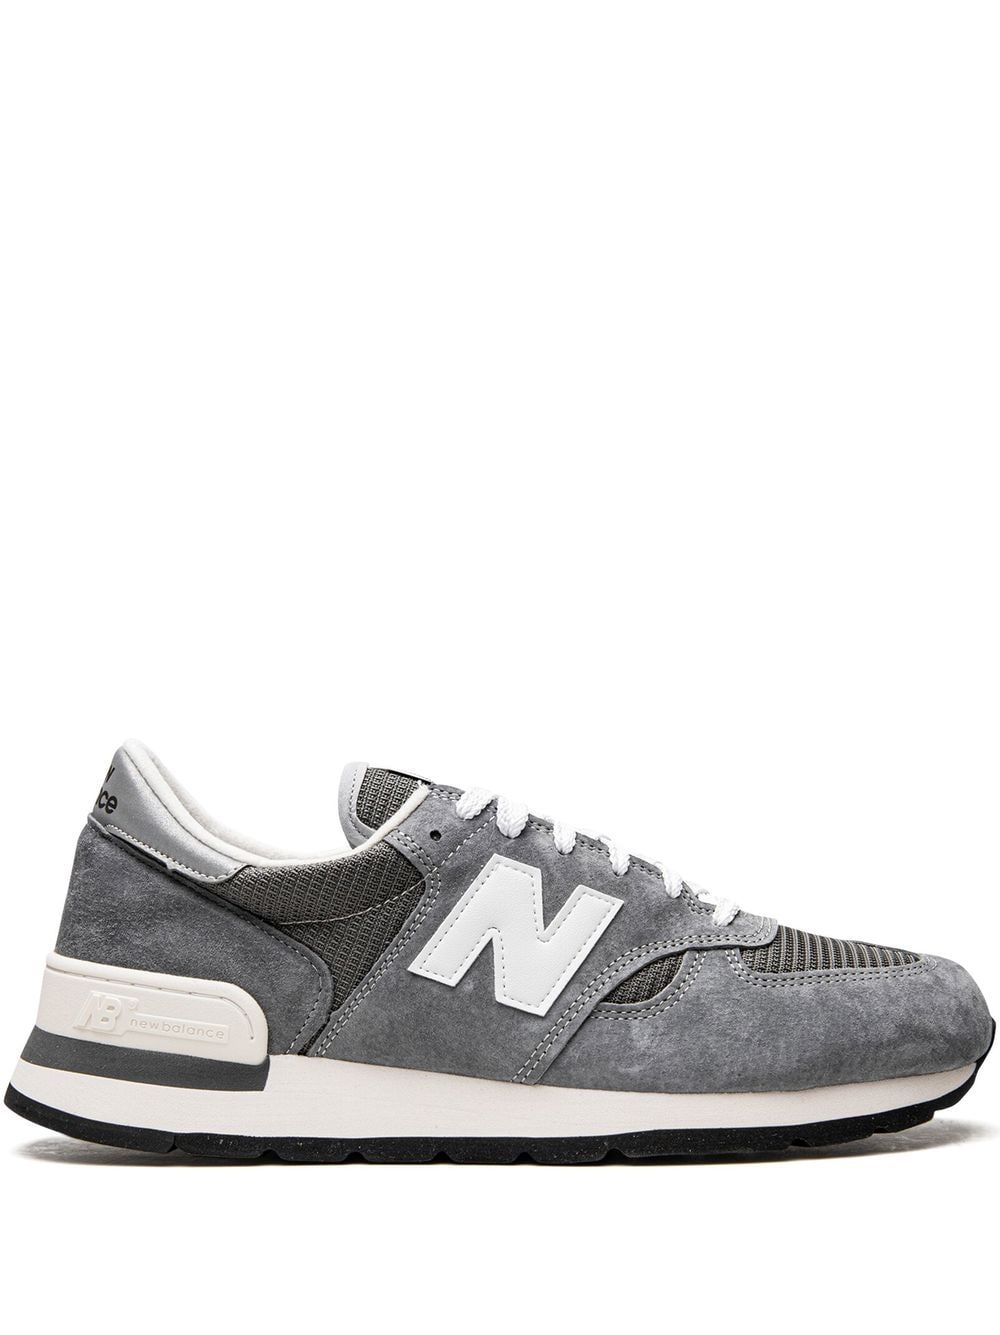 New Balance 990 Made In USA sneakers - Grijs